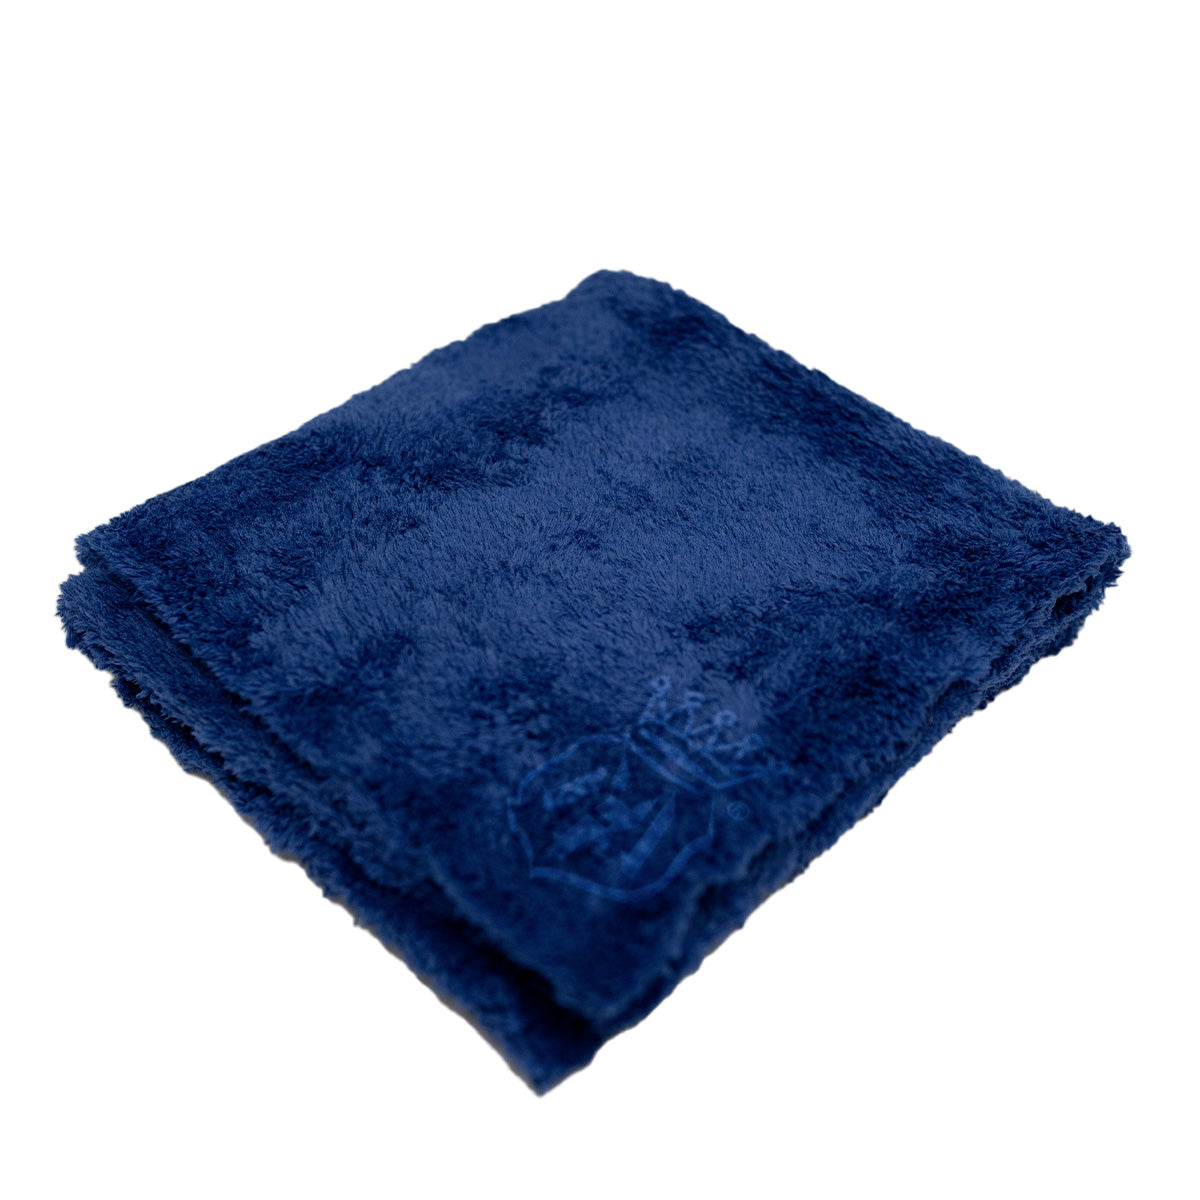 Labocosmetica buffing and polishing cloth. Buffing towel. Ultra soft microfibre with long and fluffy fibres. Soft cloth. quick detailer cloth and polish residue cloth. Labocsmetica Ireland